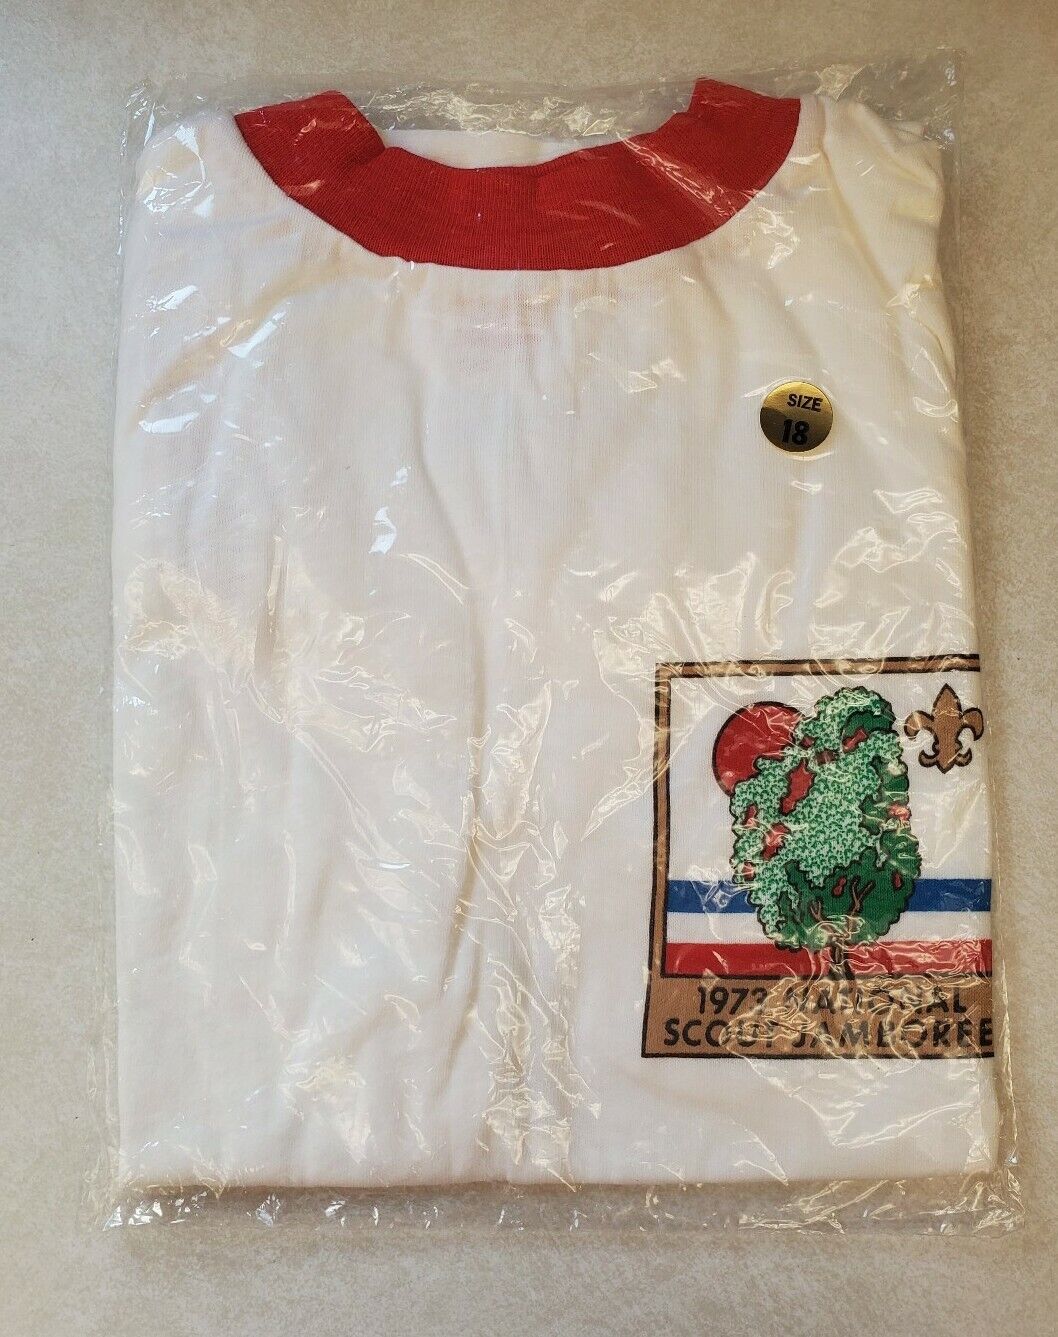 1973 National Scout Jamboree Vintage Ringer T-Shirt Size 18 - New in Plastic